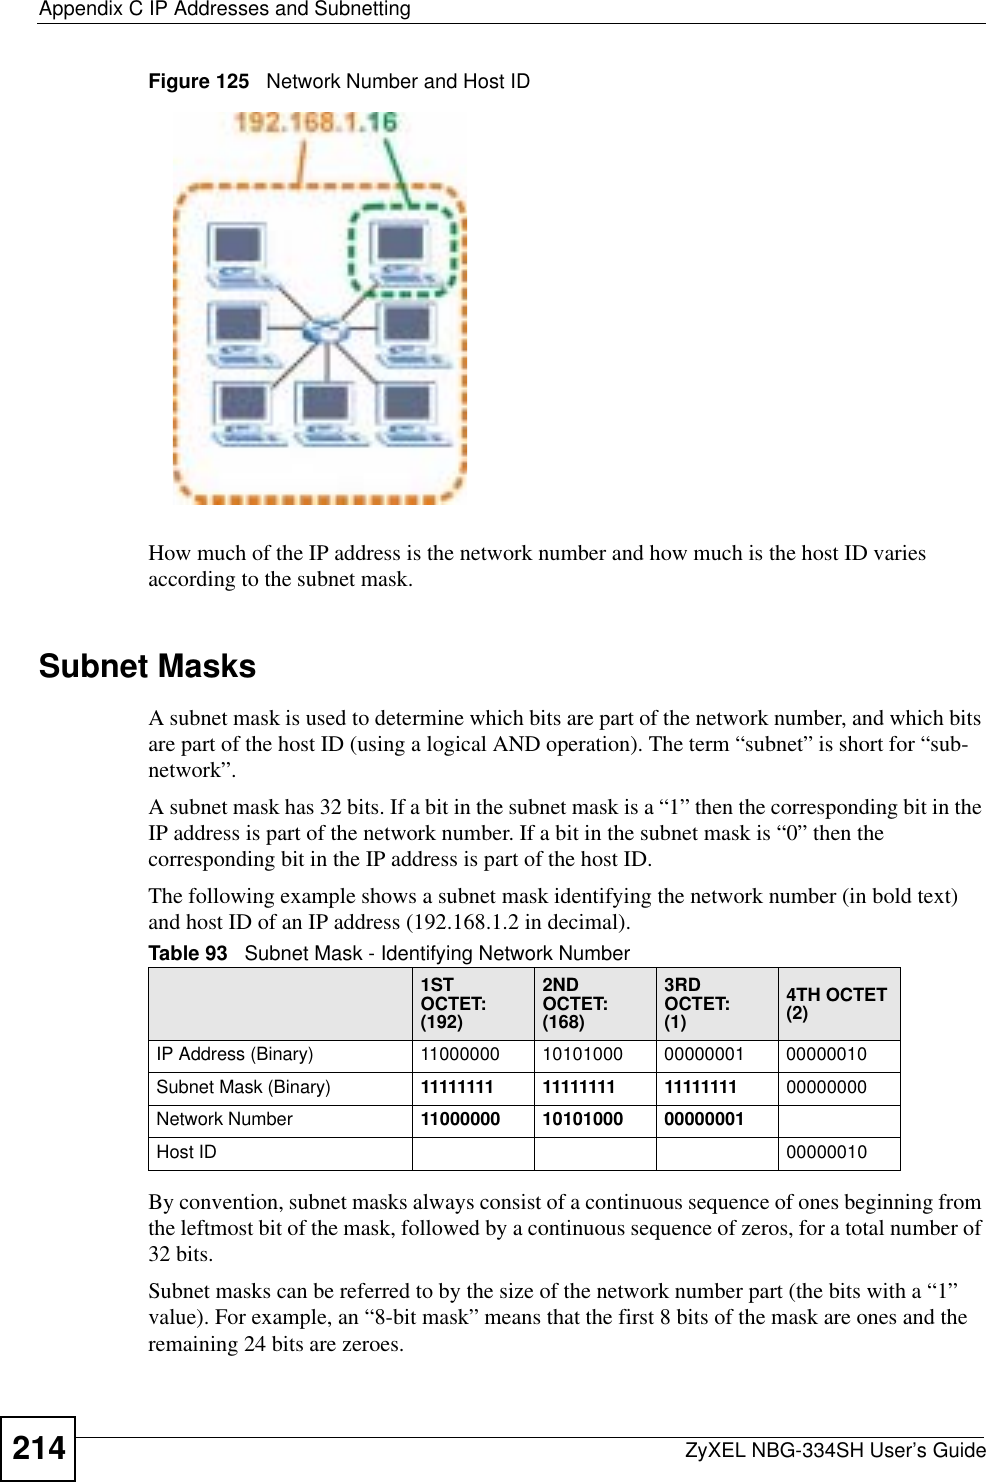 Appendix C IP Addresses and SubnettingZyXEL NBG-334SH User’s Guide214Figure 125   Network Number and Host IDHow much of the IP address is the network number and how much is the host ID varies according to the subnet mask.  Subnet MasksA subnet mask is used to determine which bits are part of the network number, and which bits are part of the host ID (using a logical AND operation). The term “subnet” is short for “sub-network”.A subnet mask has 32 bits. If a bit in the subnet mask is a “1” then the corresponding bit in the IP address is part of the network number. If a bit in the subnet mask is “0” then the corresponding bit in the IP address is part of the host ID. The following example shows a subnet mask identifying the network number (in bold text) and host ID of an IP address (192.168.1.2 in decimal).By convention, subnet masks always consist of a continuous sequence of ones beginning from the leftmost bit of the mask, followed by a continuous sequence of zeros, for a total number of 32 bits.Subnet masks can be referred to by the size of the network number part (the bits with a “1” value). For example, an “8-bit mask” means that the first 8 bits of the mask are ones and the remaining 24 bits are zeroes.Table 93   Subnet Mask - Identifying Network Number1ST OCTET:(192)2ND OCTET:(168)3RD OCTET:(1)4TH OCTET(2)IP Address (Binary) 11000000 10101000 00000001 00000010Subnet Mask (Binary) 11111111 11111111 11111111 00000000Network Number 11000000 10101000 00000001Host ID 00000010